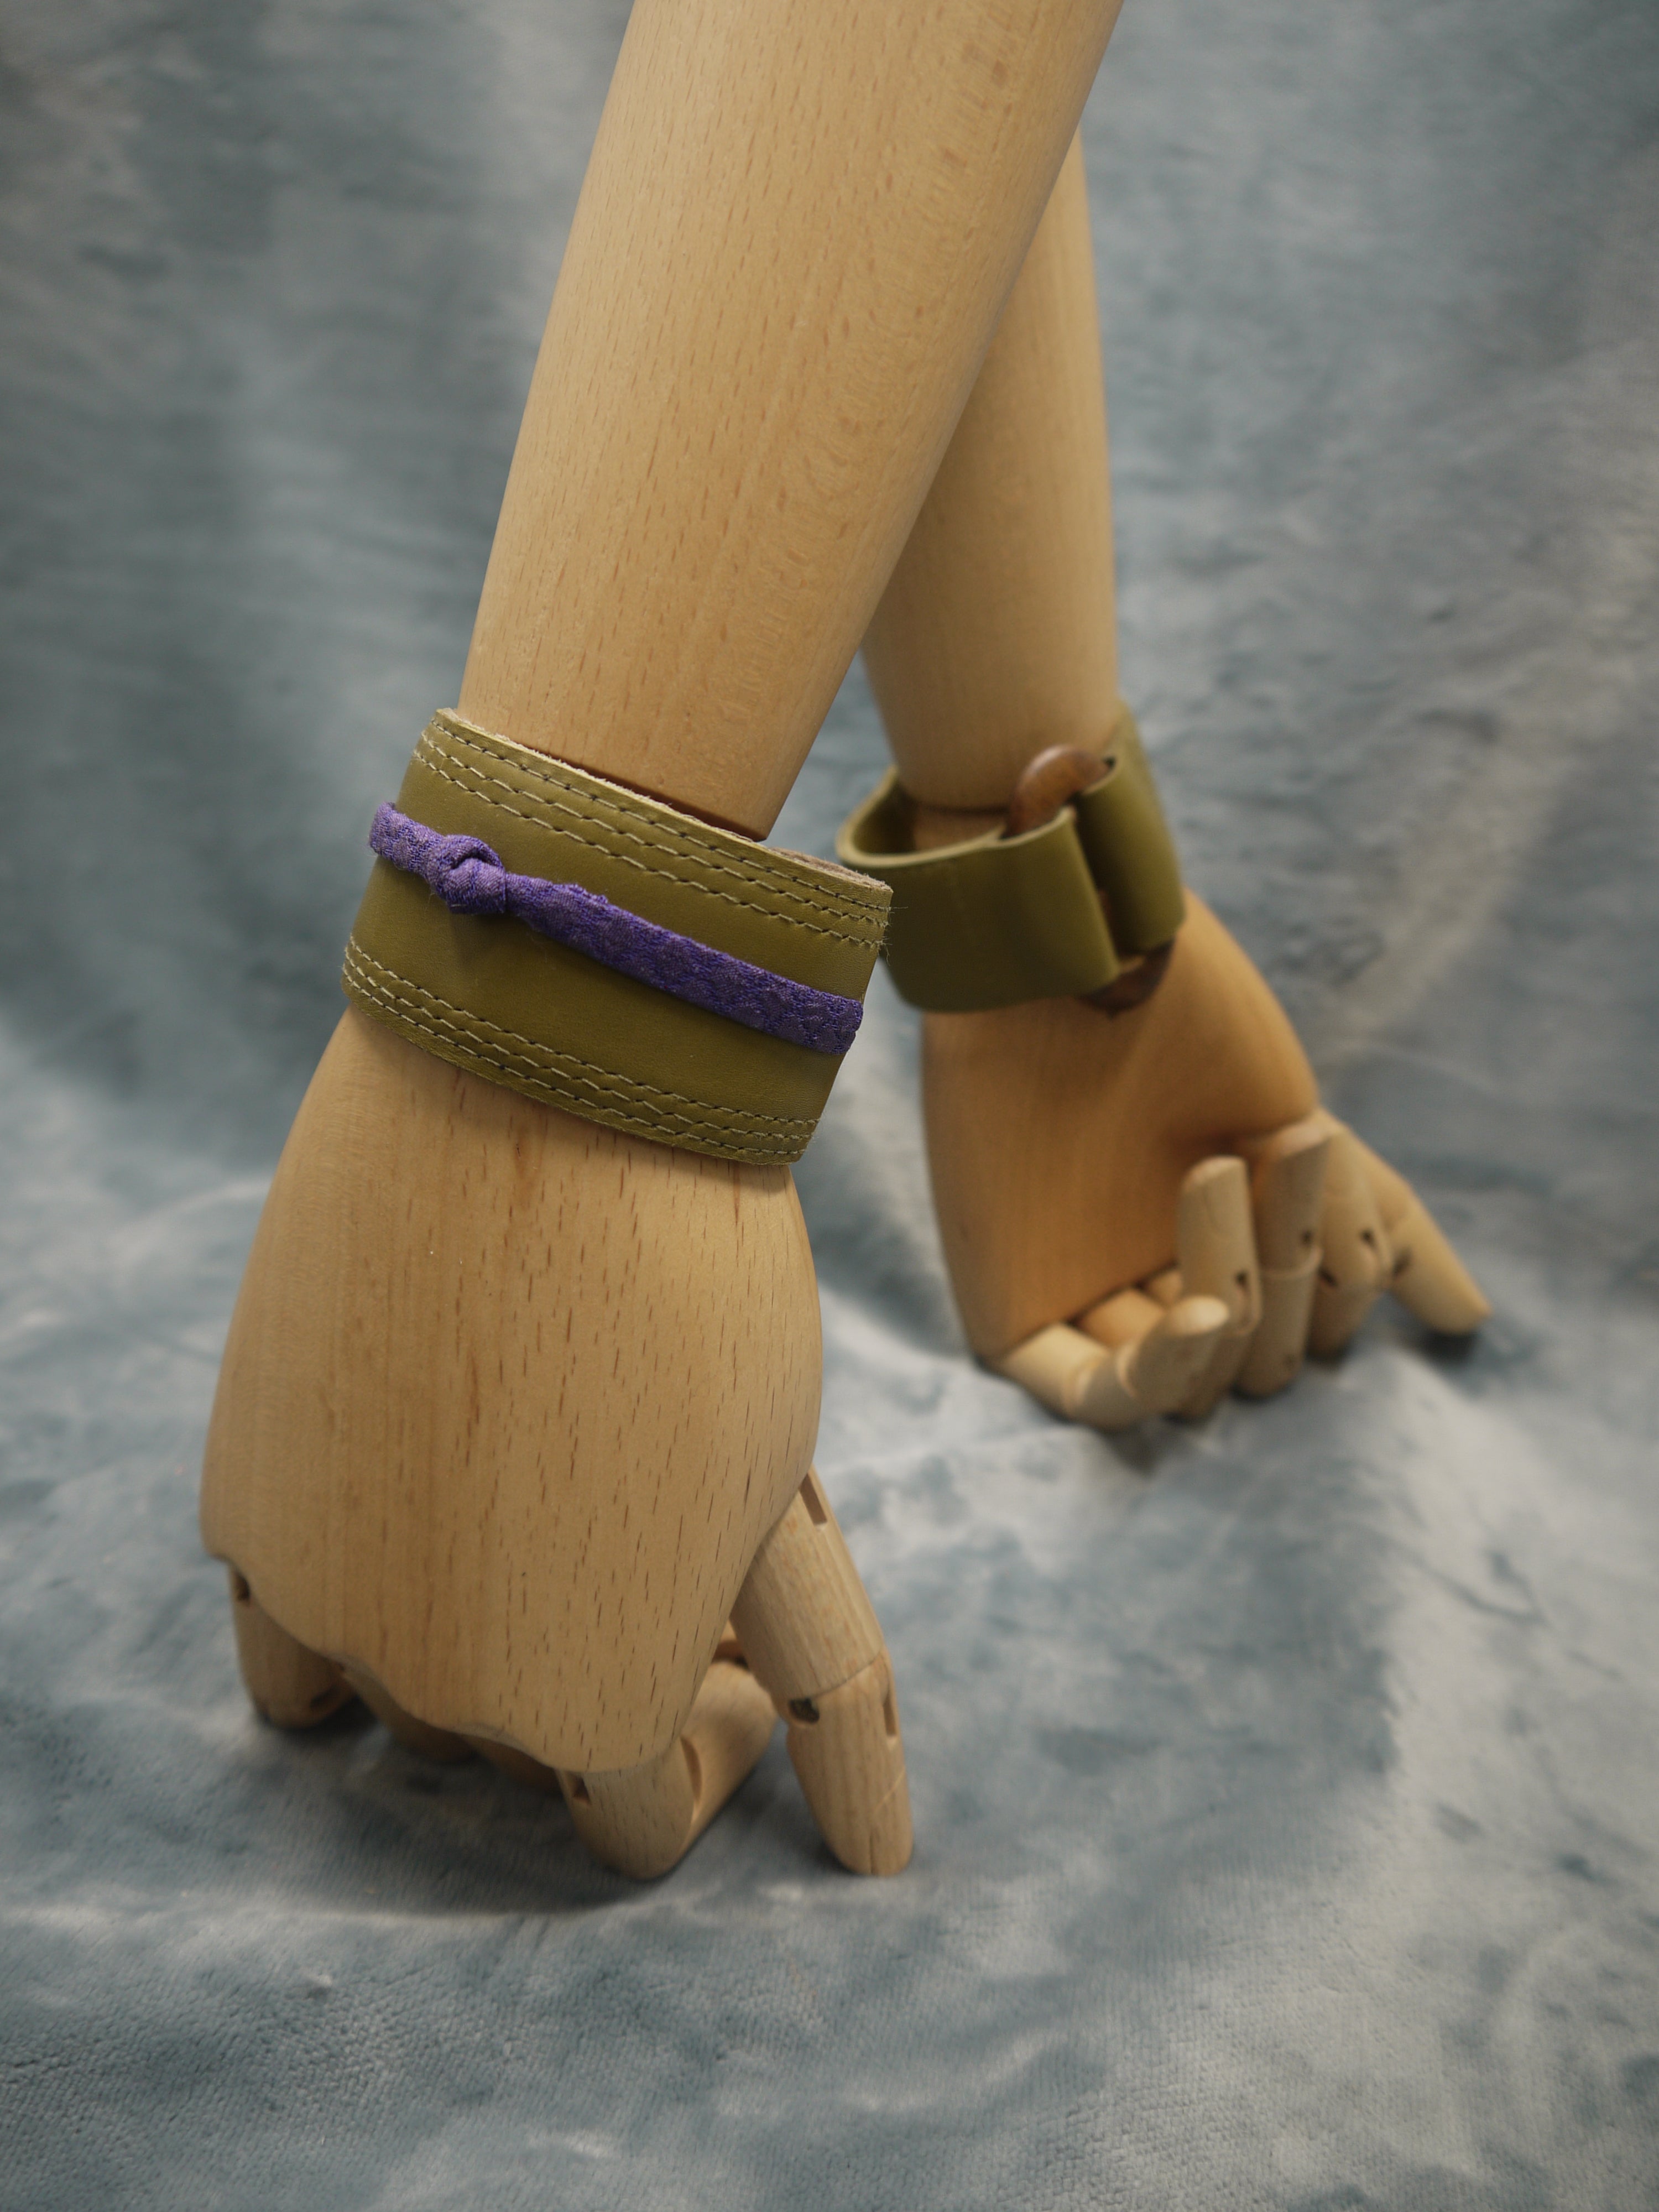 Olive green slimline Italian leather cuff with royal purple slim silk knot central on the cuff. The cugff has elegant repeat stitch detail around the edges. Close-Up Image